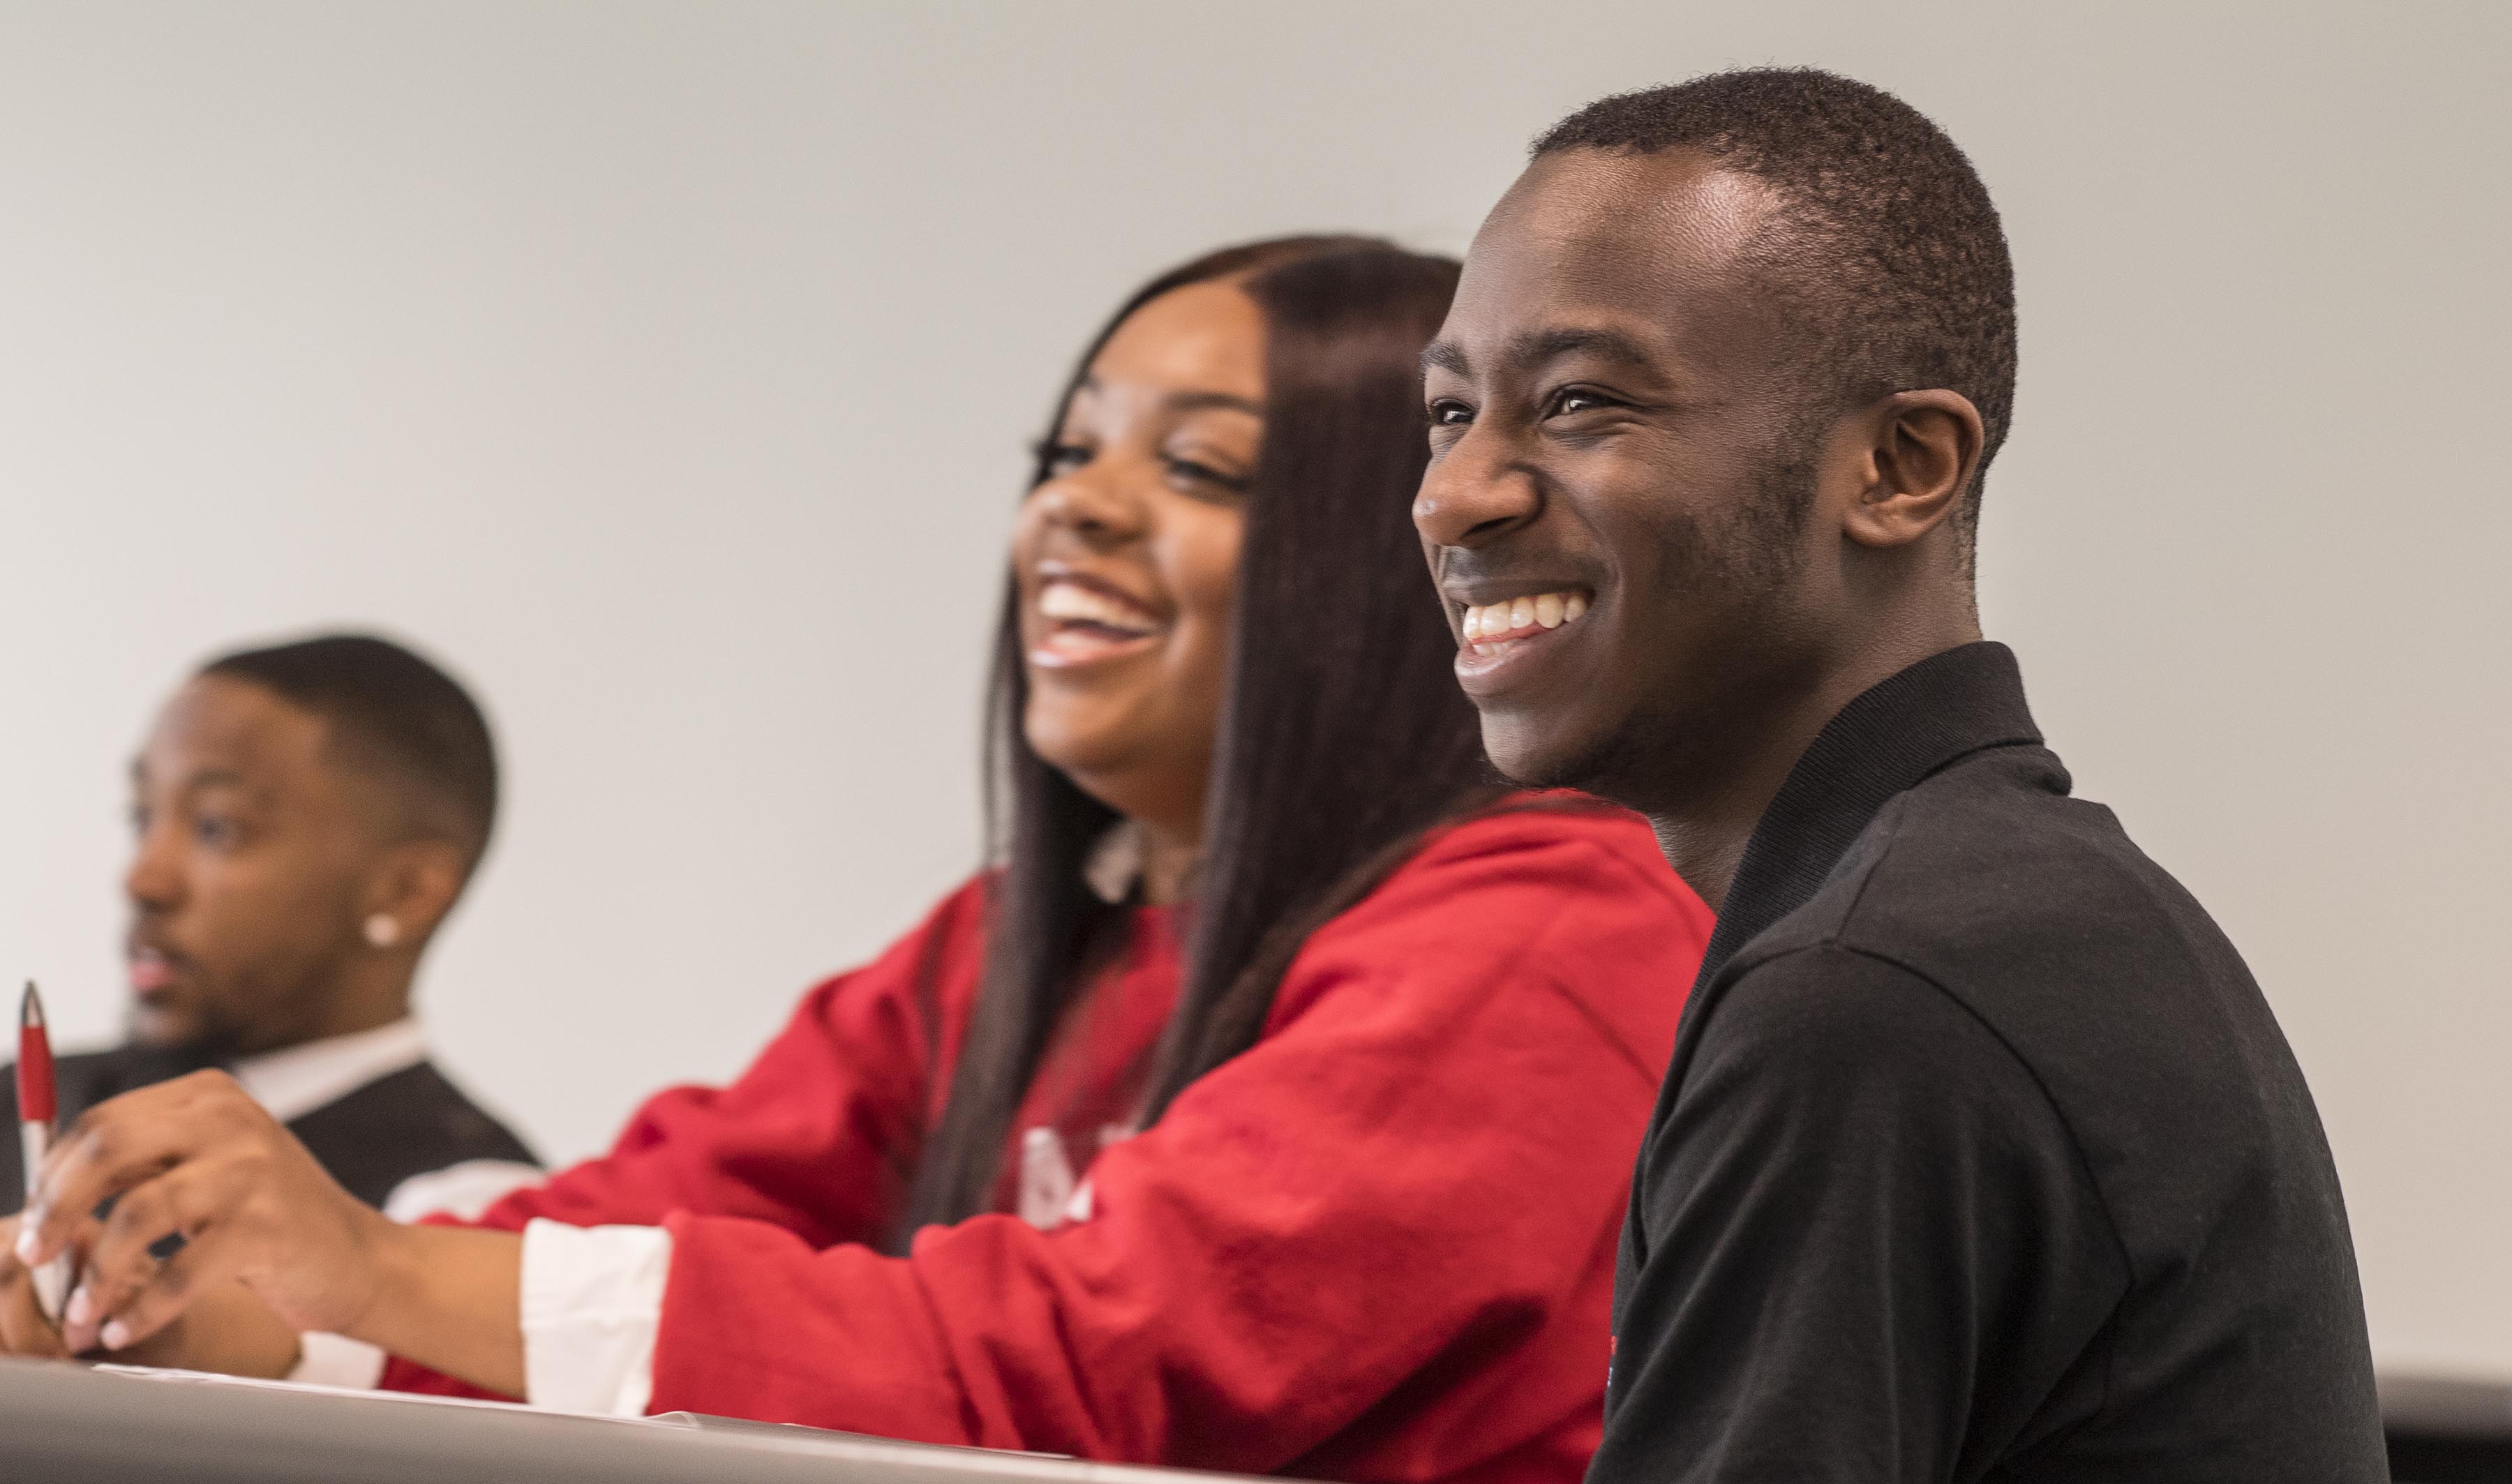 Delaware State University has been elevated to #10 in the U.S. News & World Report's latest rankings of Historically Black Colleges & Universities and has maintained its #3 ranking among public HBCUs.